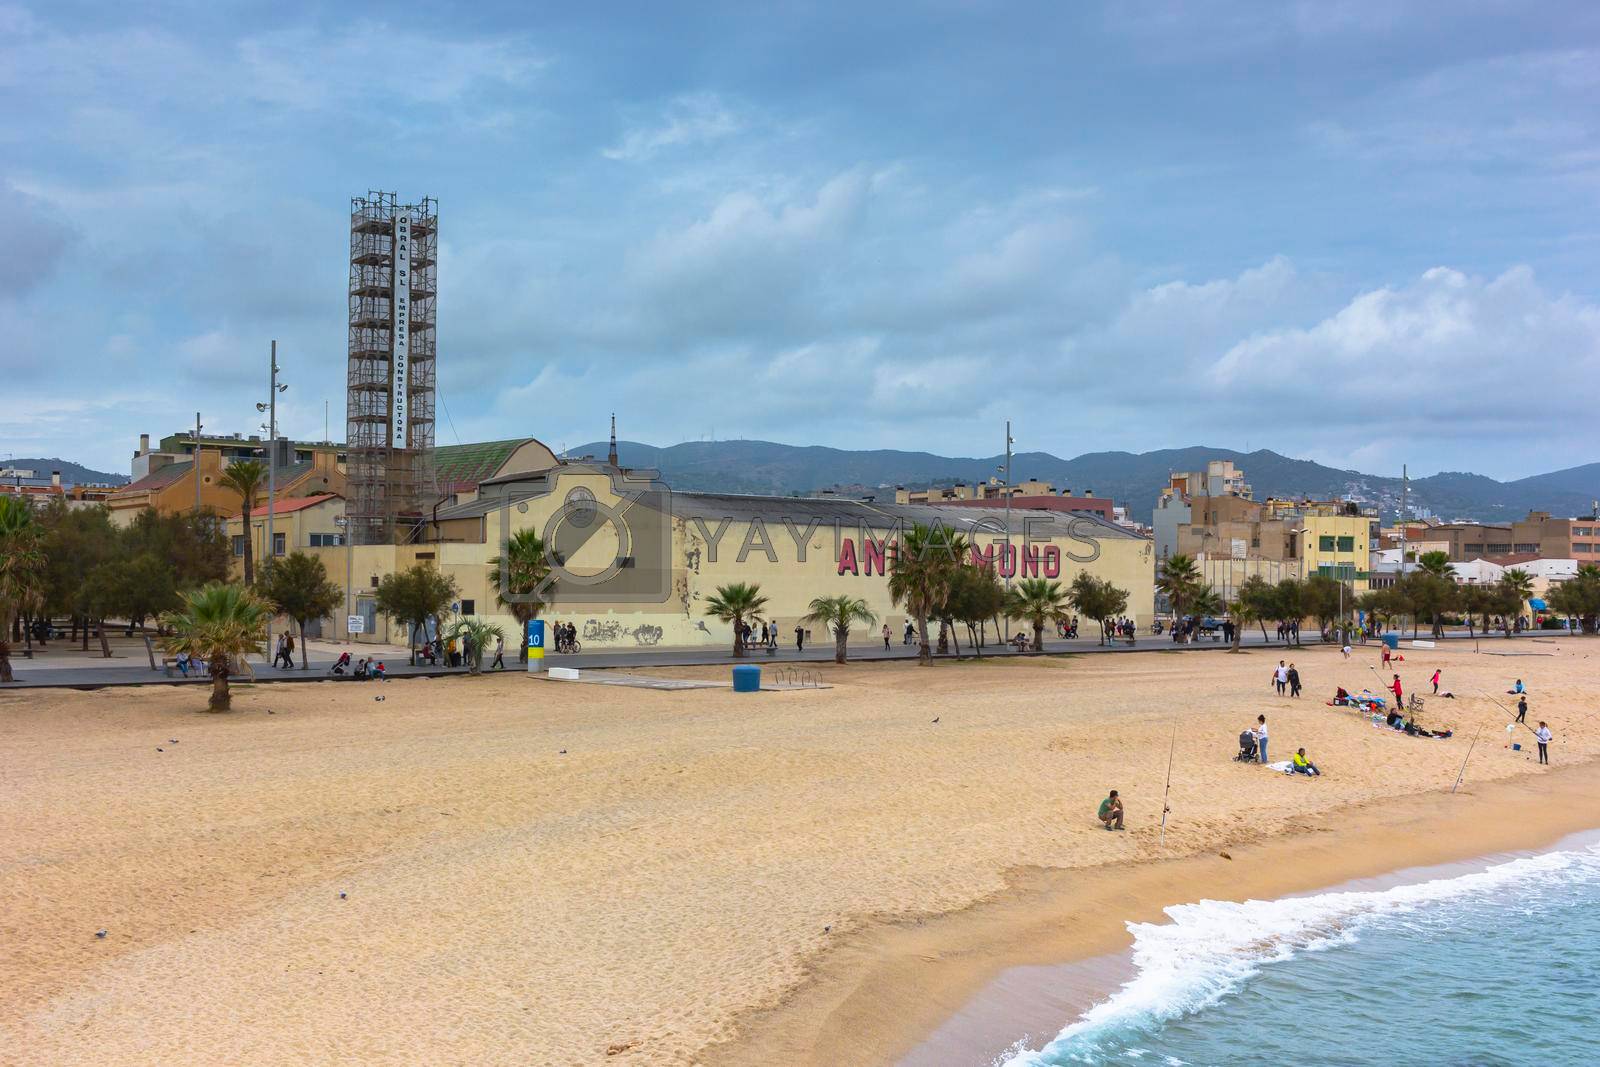 Barcelona beach in winter, with a calm sea and a cloudy blue sky